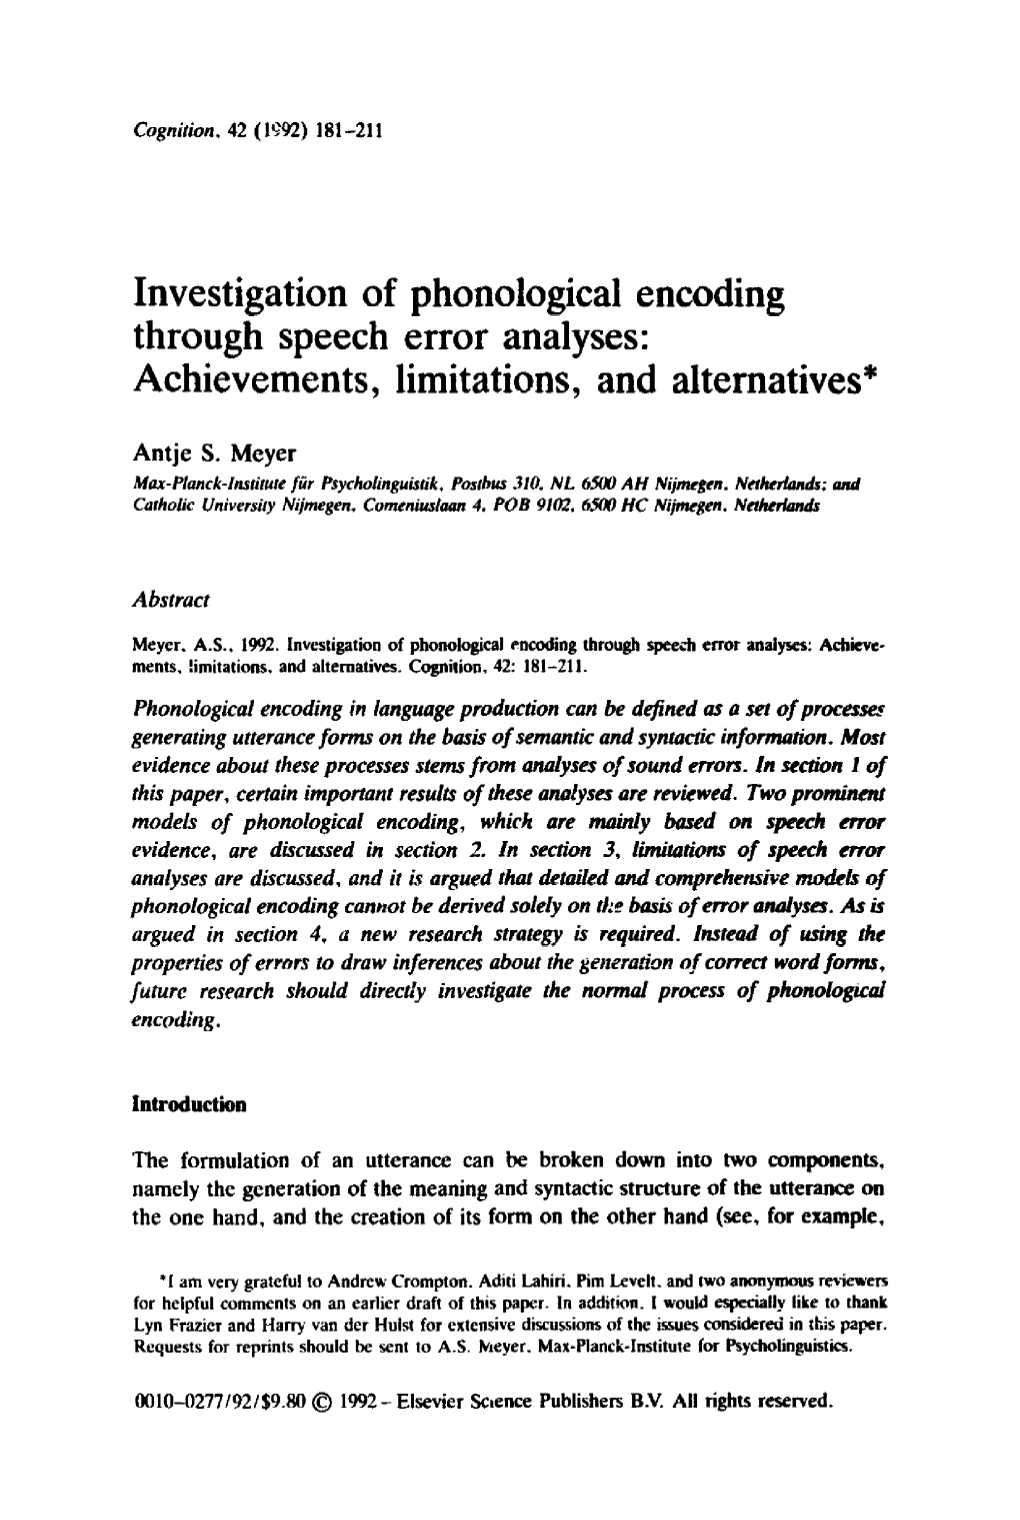 Investigation of Phonological Encoding Through Speech Error Analyses: Achievements, Limitations, and Alternatives*